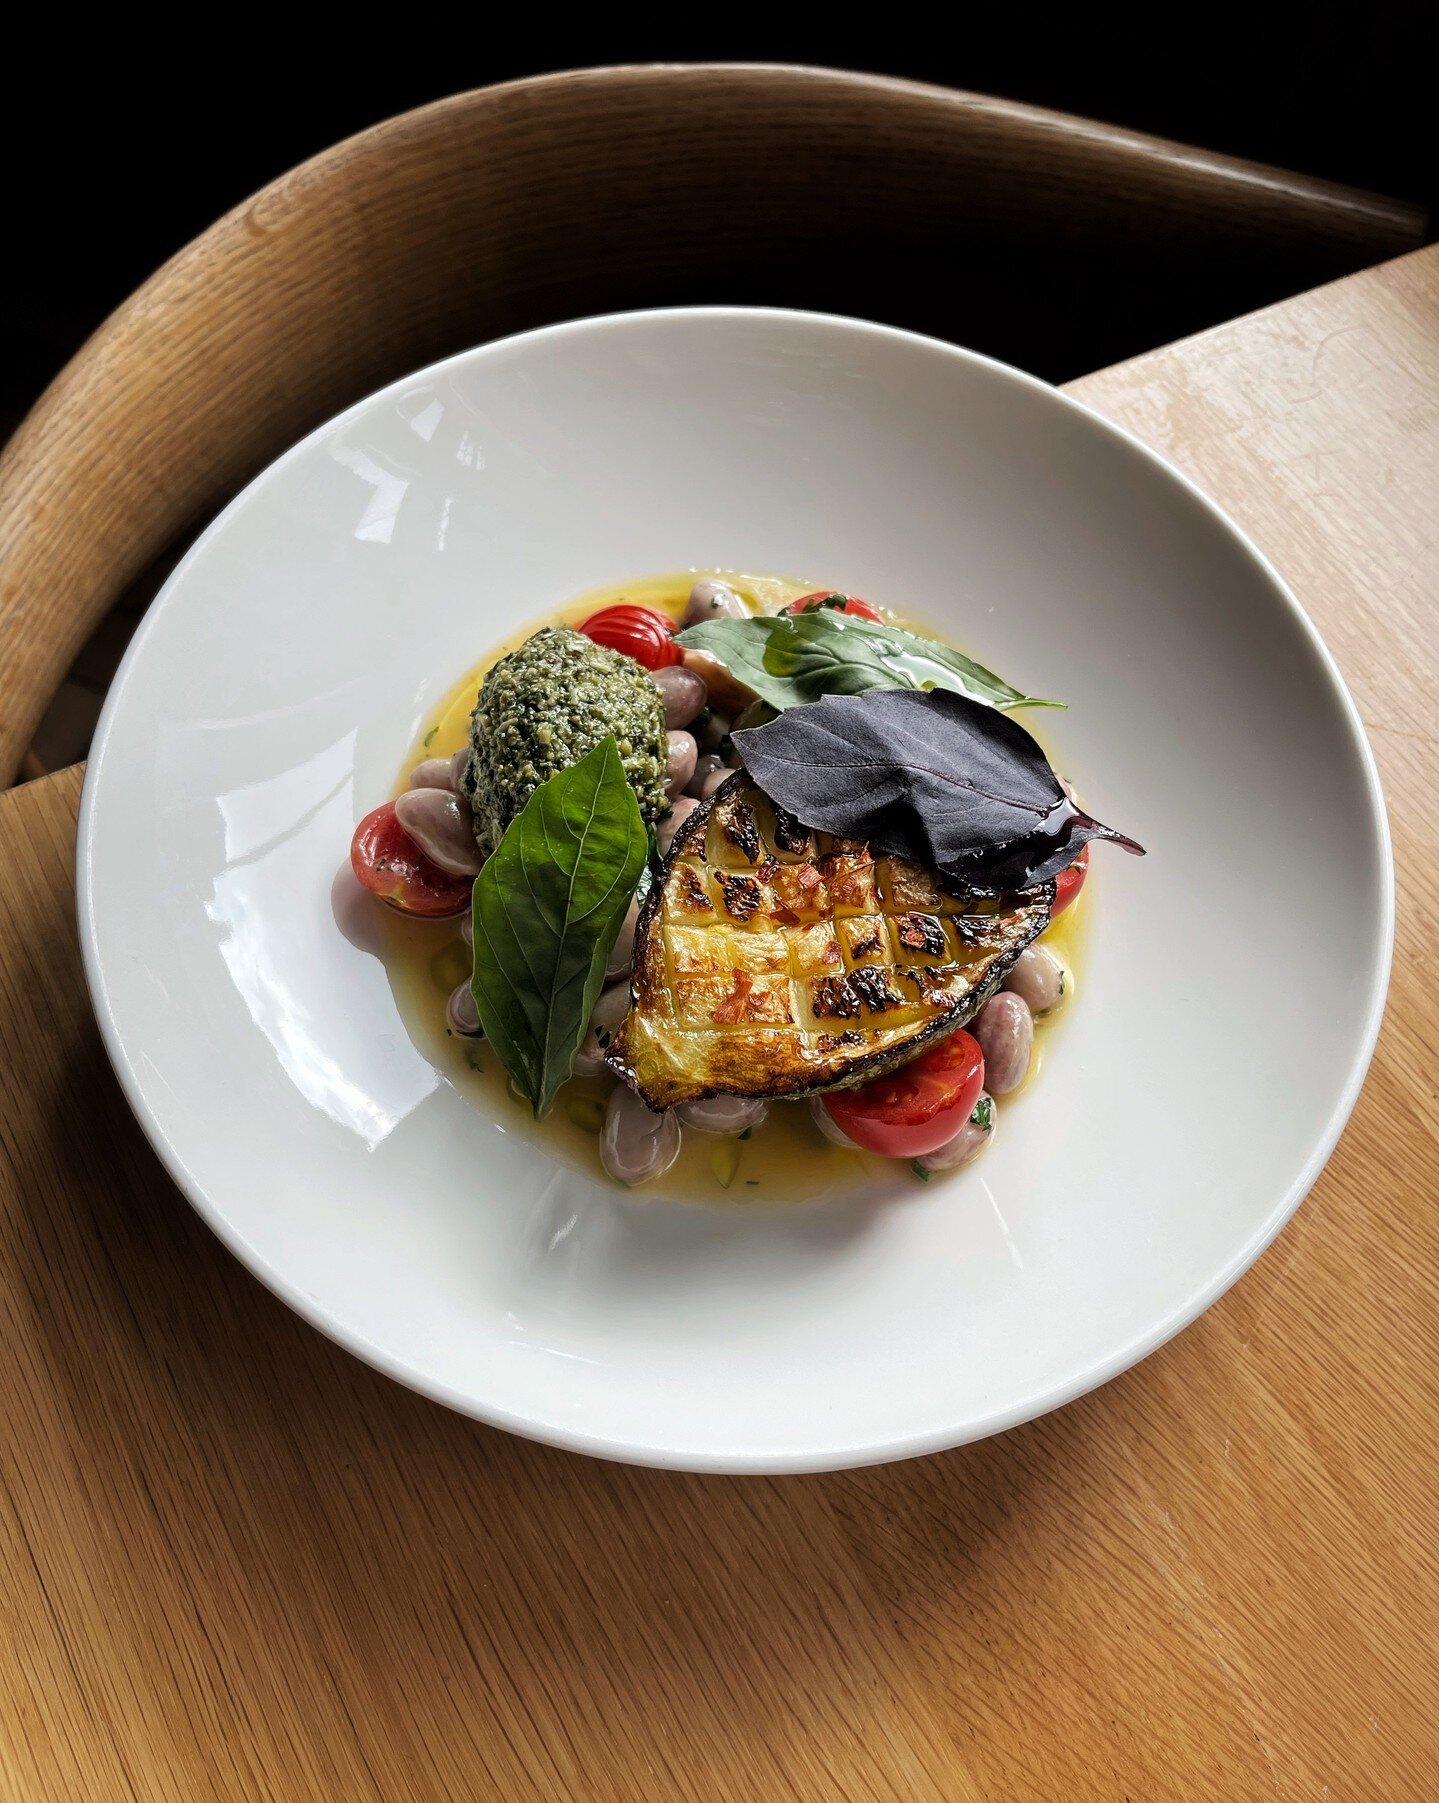 An ode to allotment lovers everywhere; grilled courgette, Borlotti beans and tomatoes from @shrubprovisions with walnut pesto doused in a butter emulsion. Now on the veggie set and alc 💚

#townsendrestaurant
.
.
.
.
#britishfarmers #localfarmers #Th